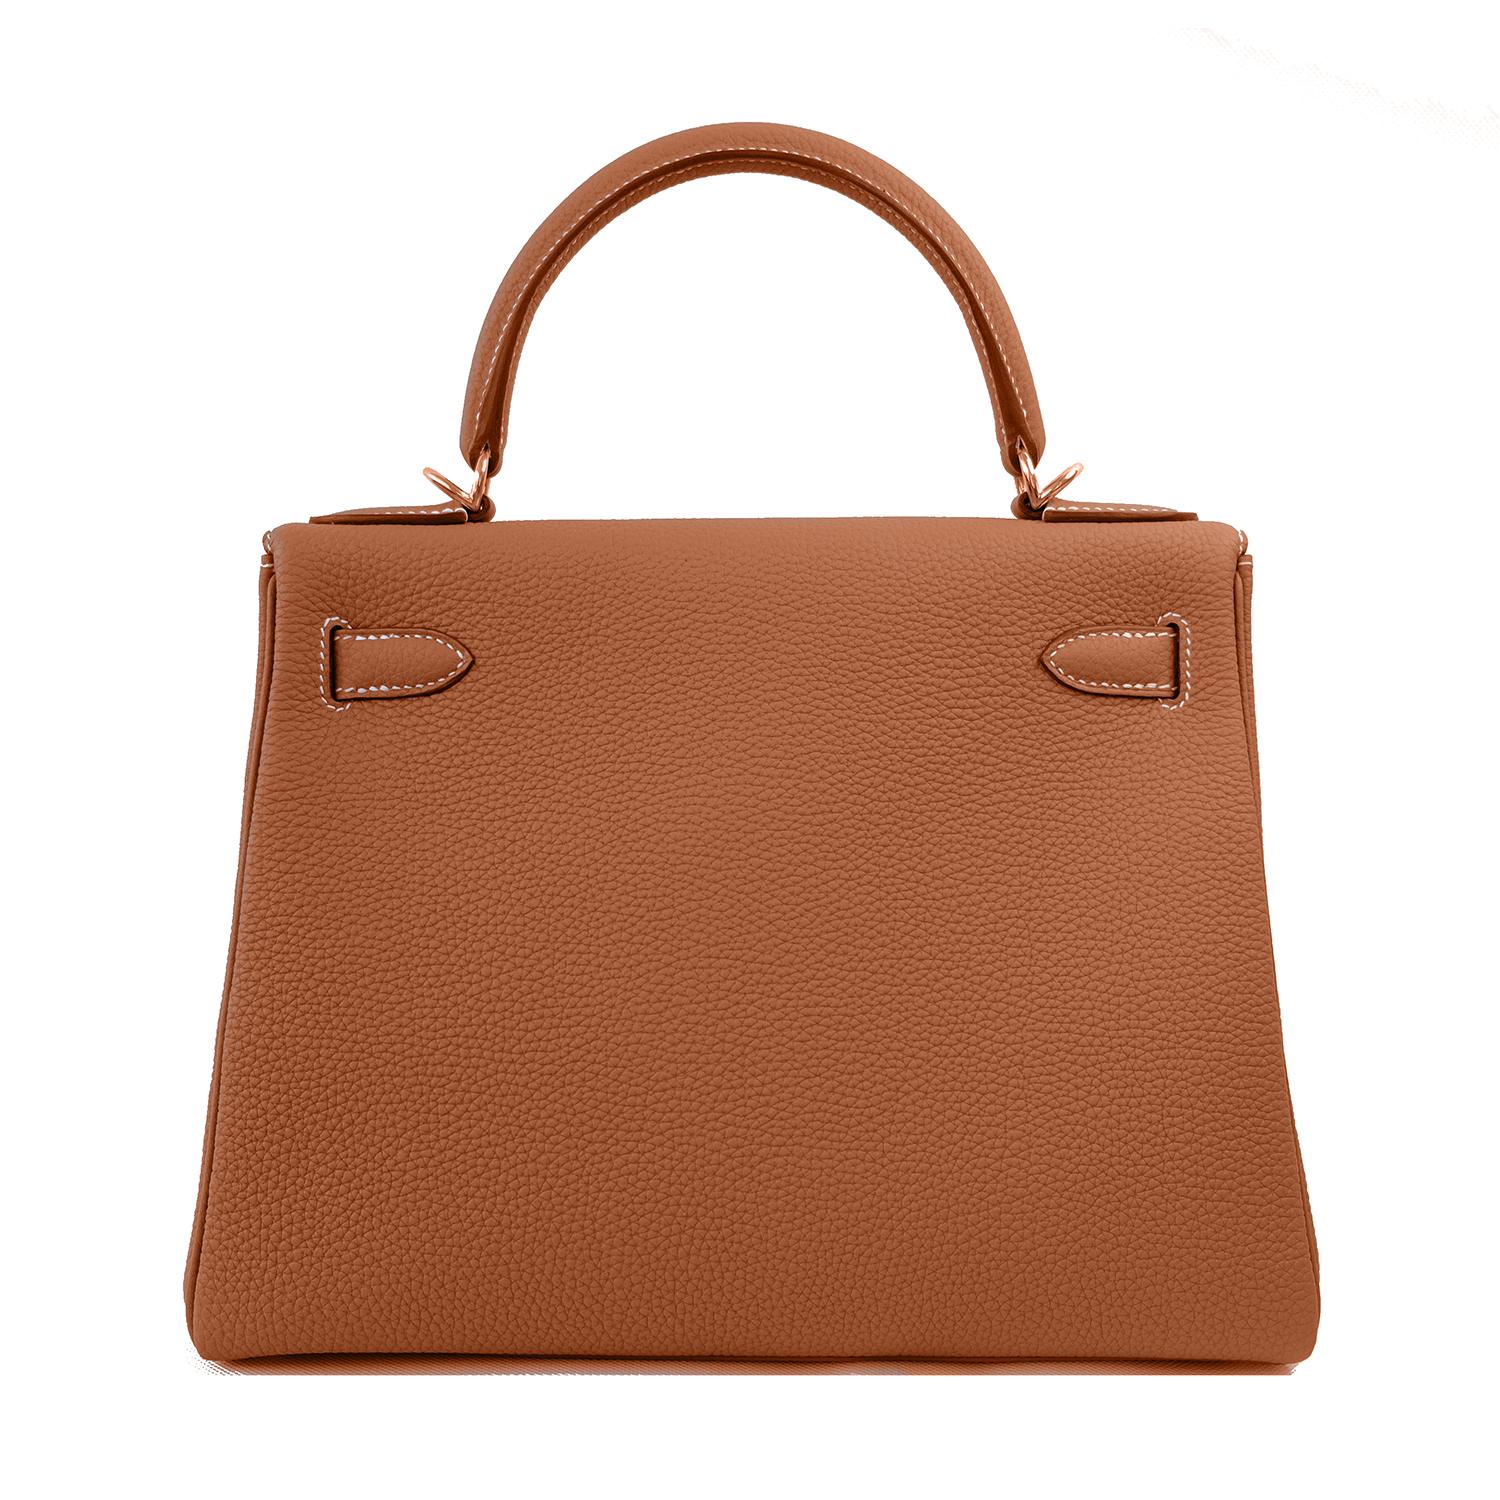 Hermes Kelly 25cm Gold Camel Tan Shoulder Bag Togo Retourne Z Stamp, 2021
Brand New in Box. Store Fresh. Pristine Condition (with plastic on hardware)
Just purchased from Hermes store; bag bears new 2021 interior Z Stamp.
Comes full set with keys,